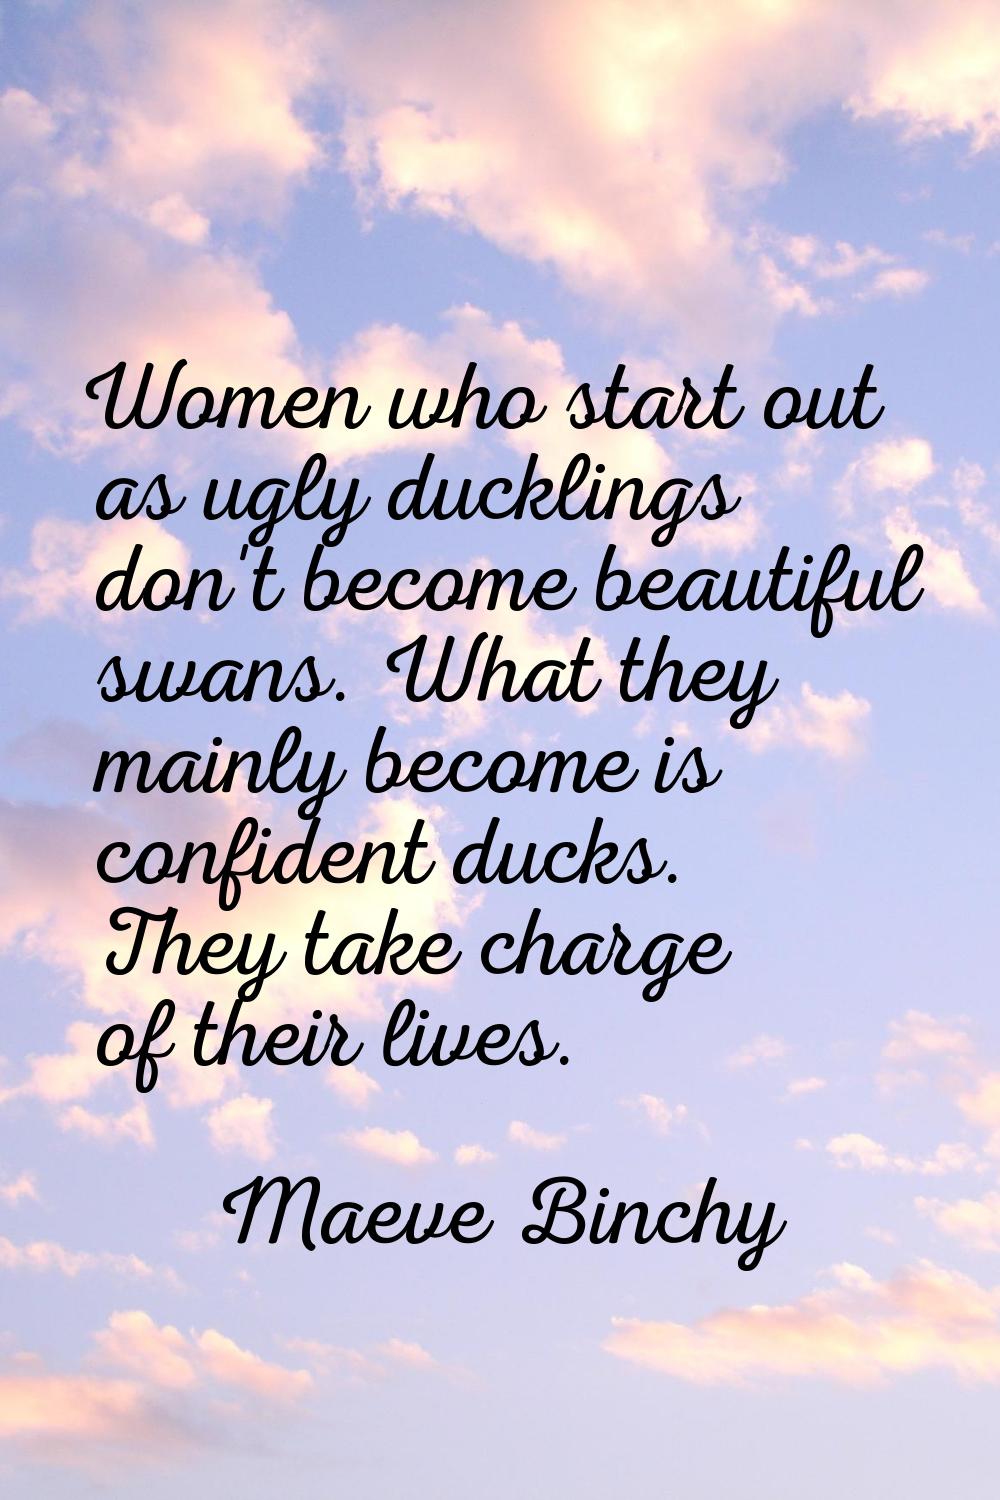 Women who start out as ugly ducklings don't become beautiful swans. What they mainly become is conf